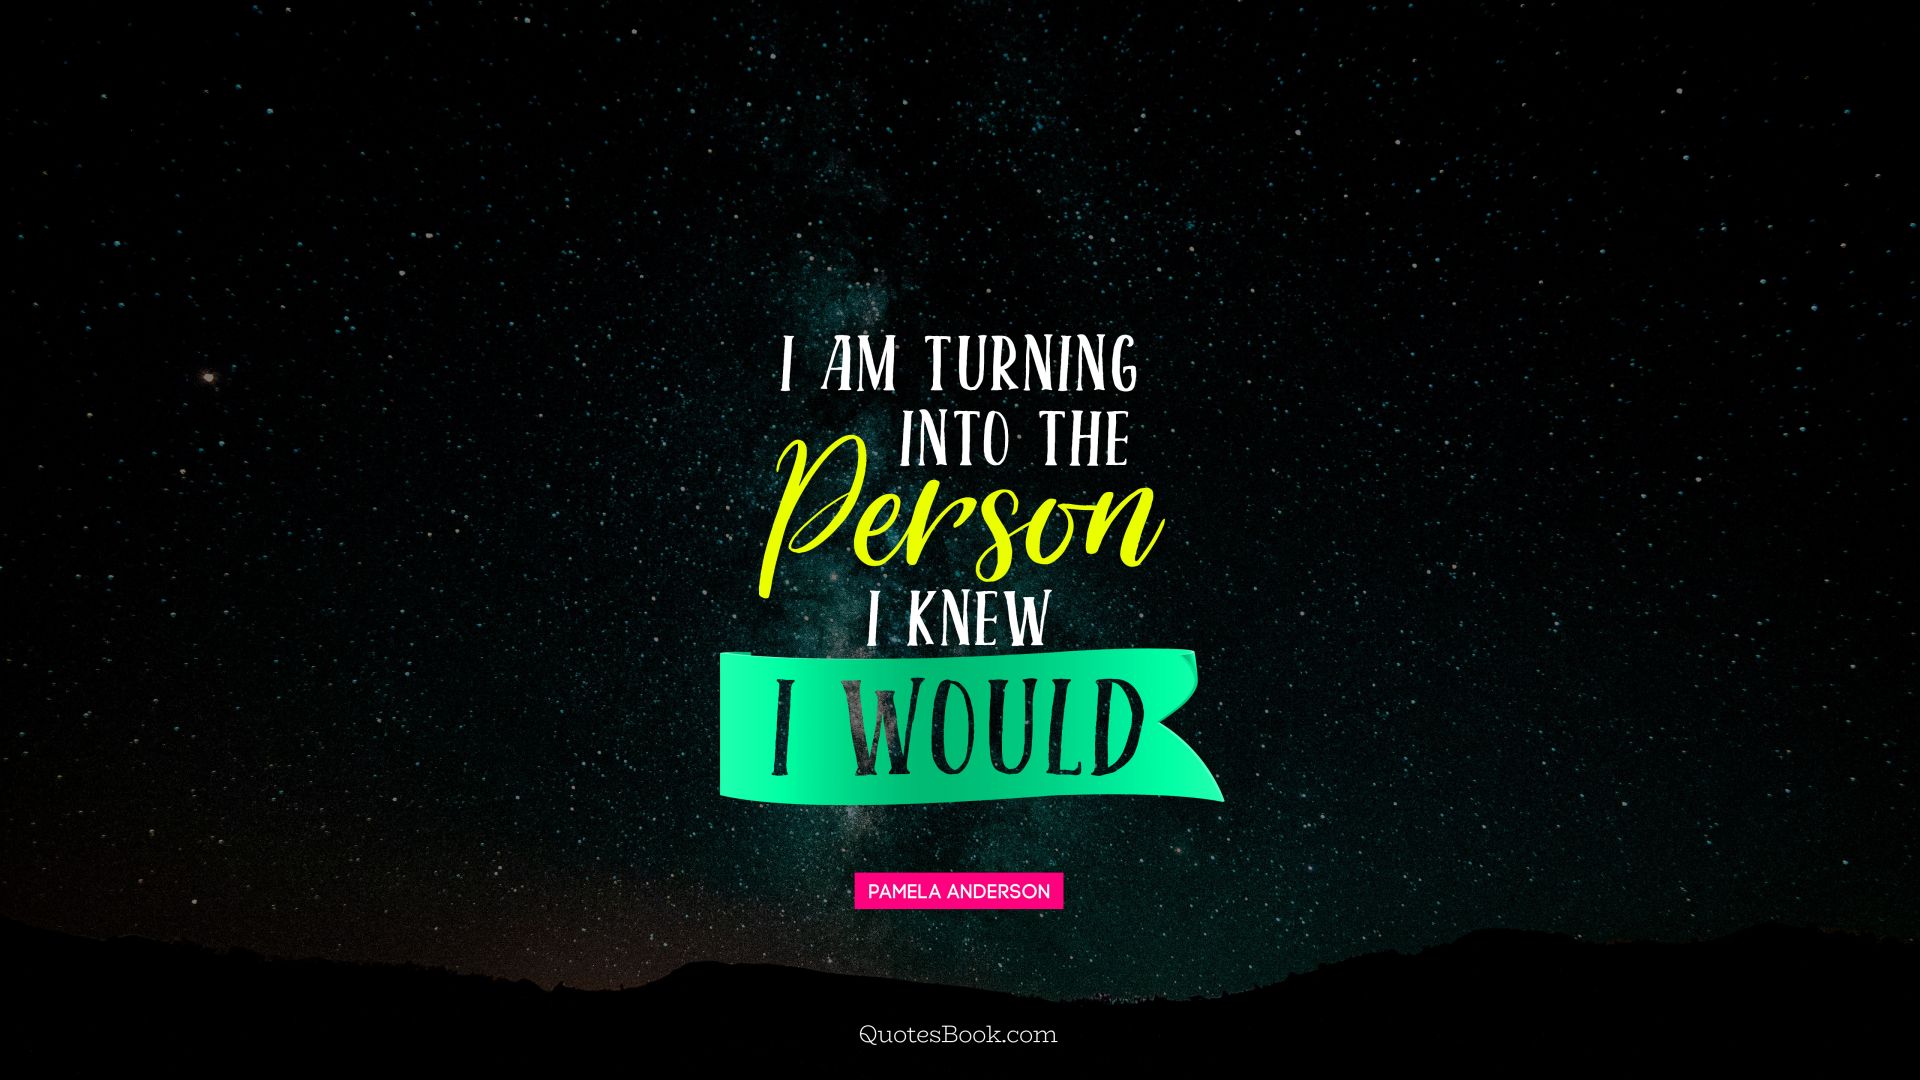 I am turning into the person I knew I would. - Quote by Pamela Anderson